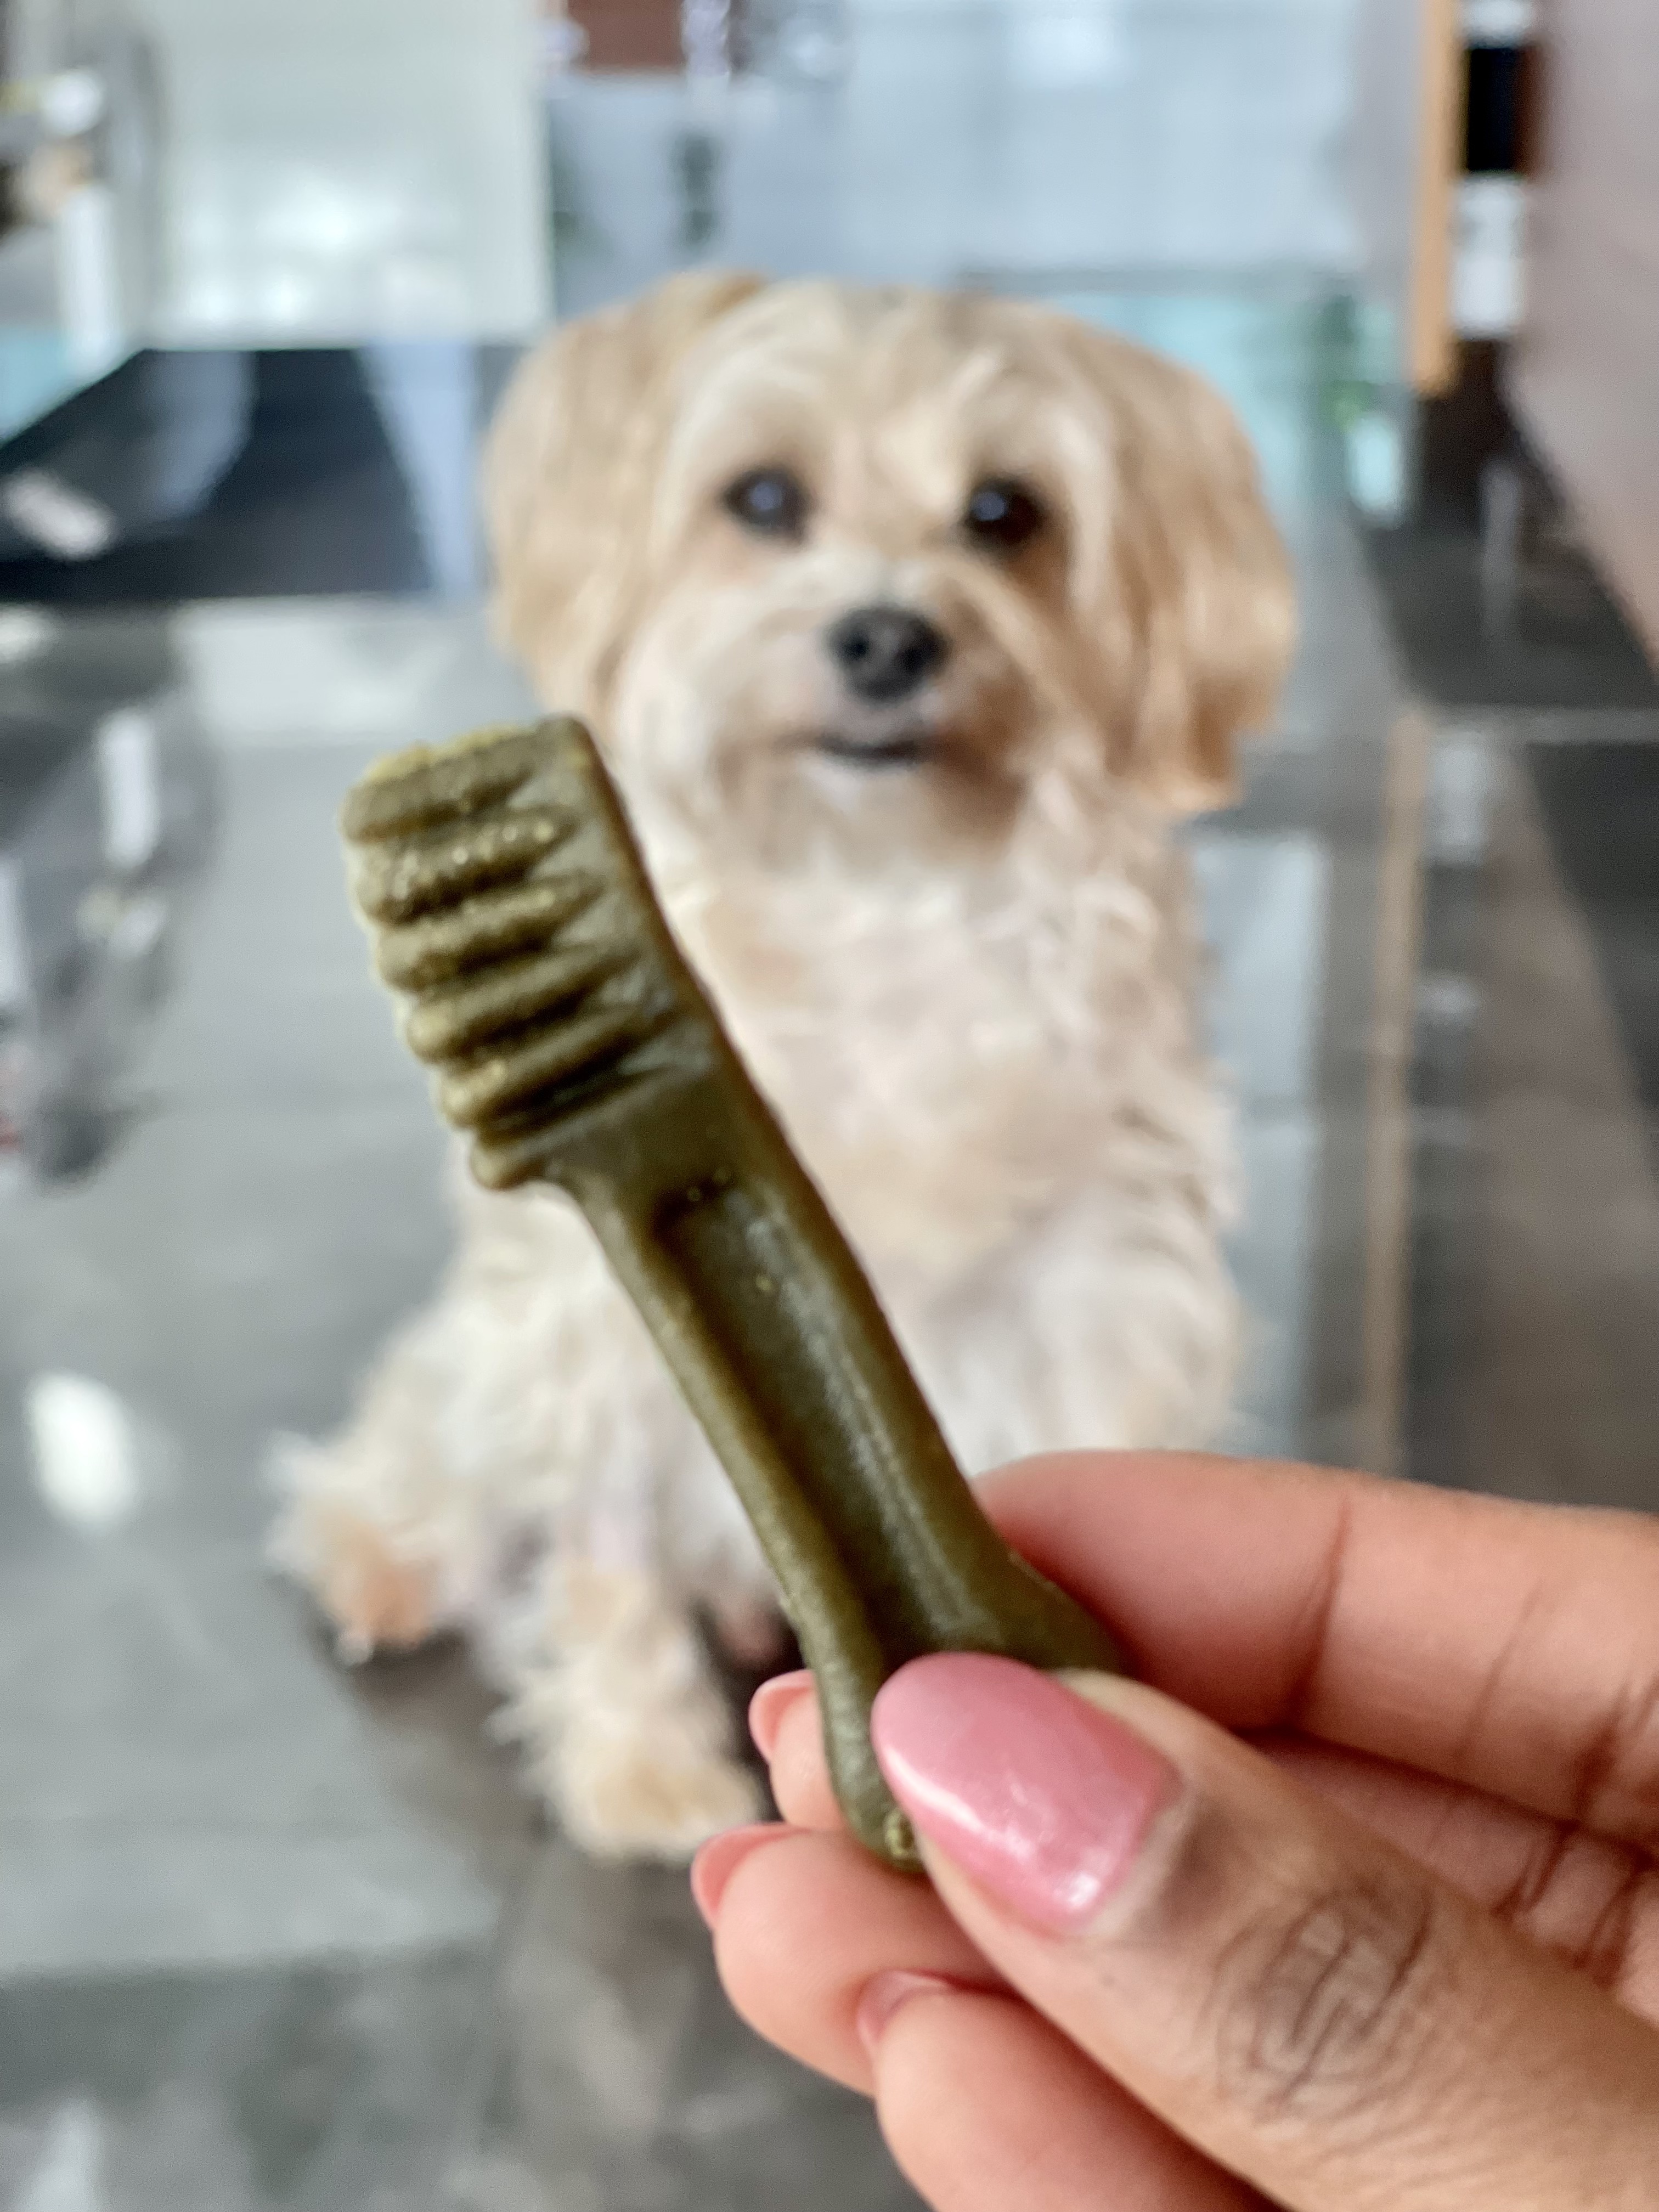 How To Clean Dog Teeth Without Brushing